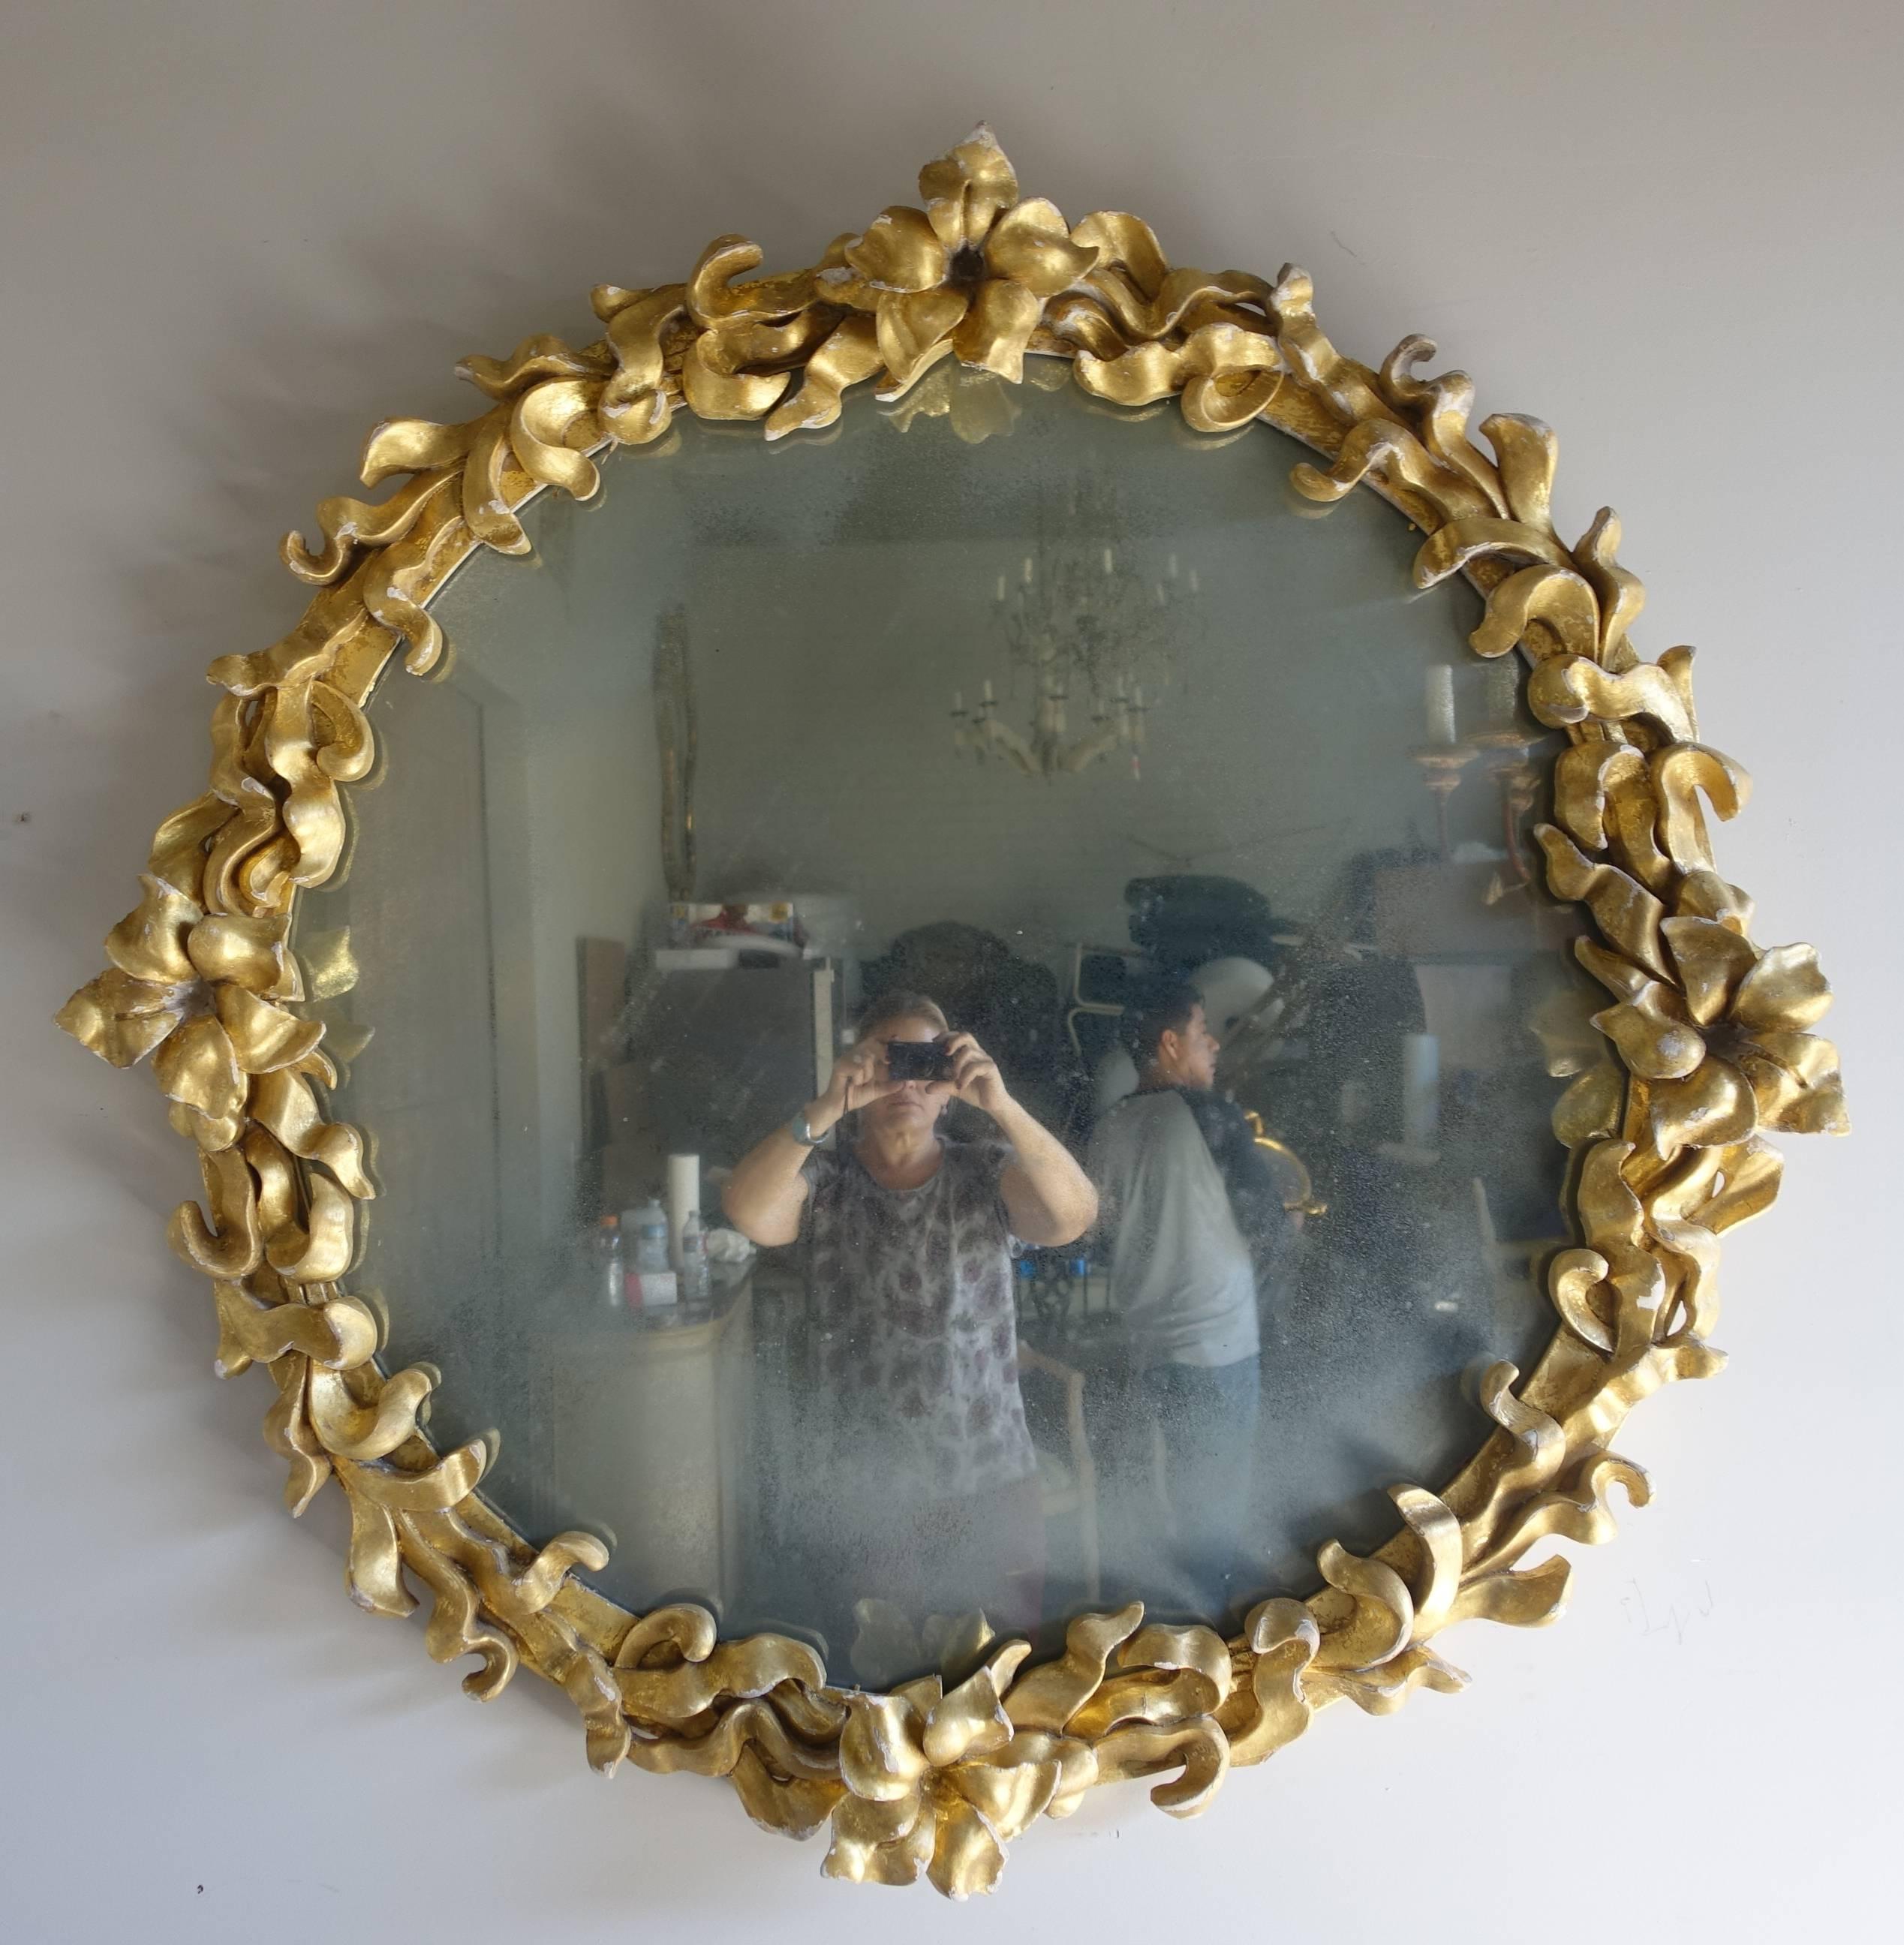 Hand-carved giltwood round mirror with leaves and flowers carved around the perimeter of the mirror frame. Antiqued mirror.